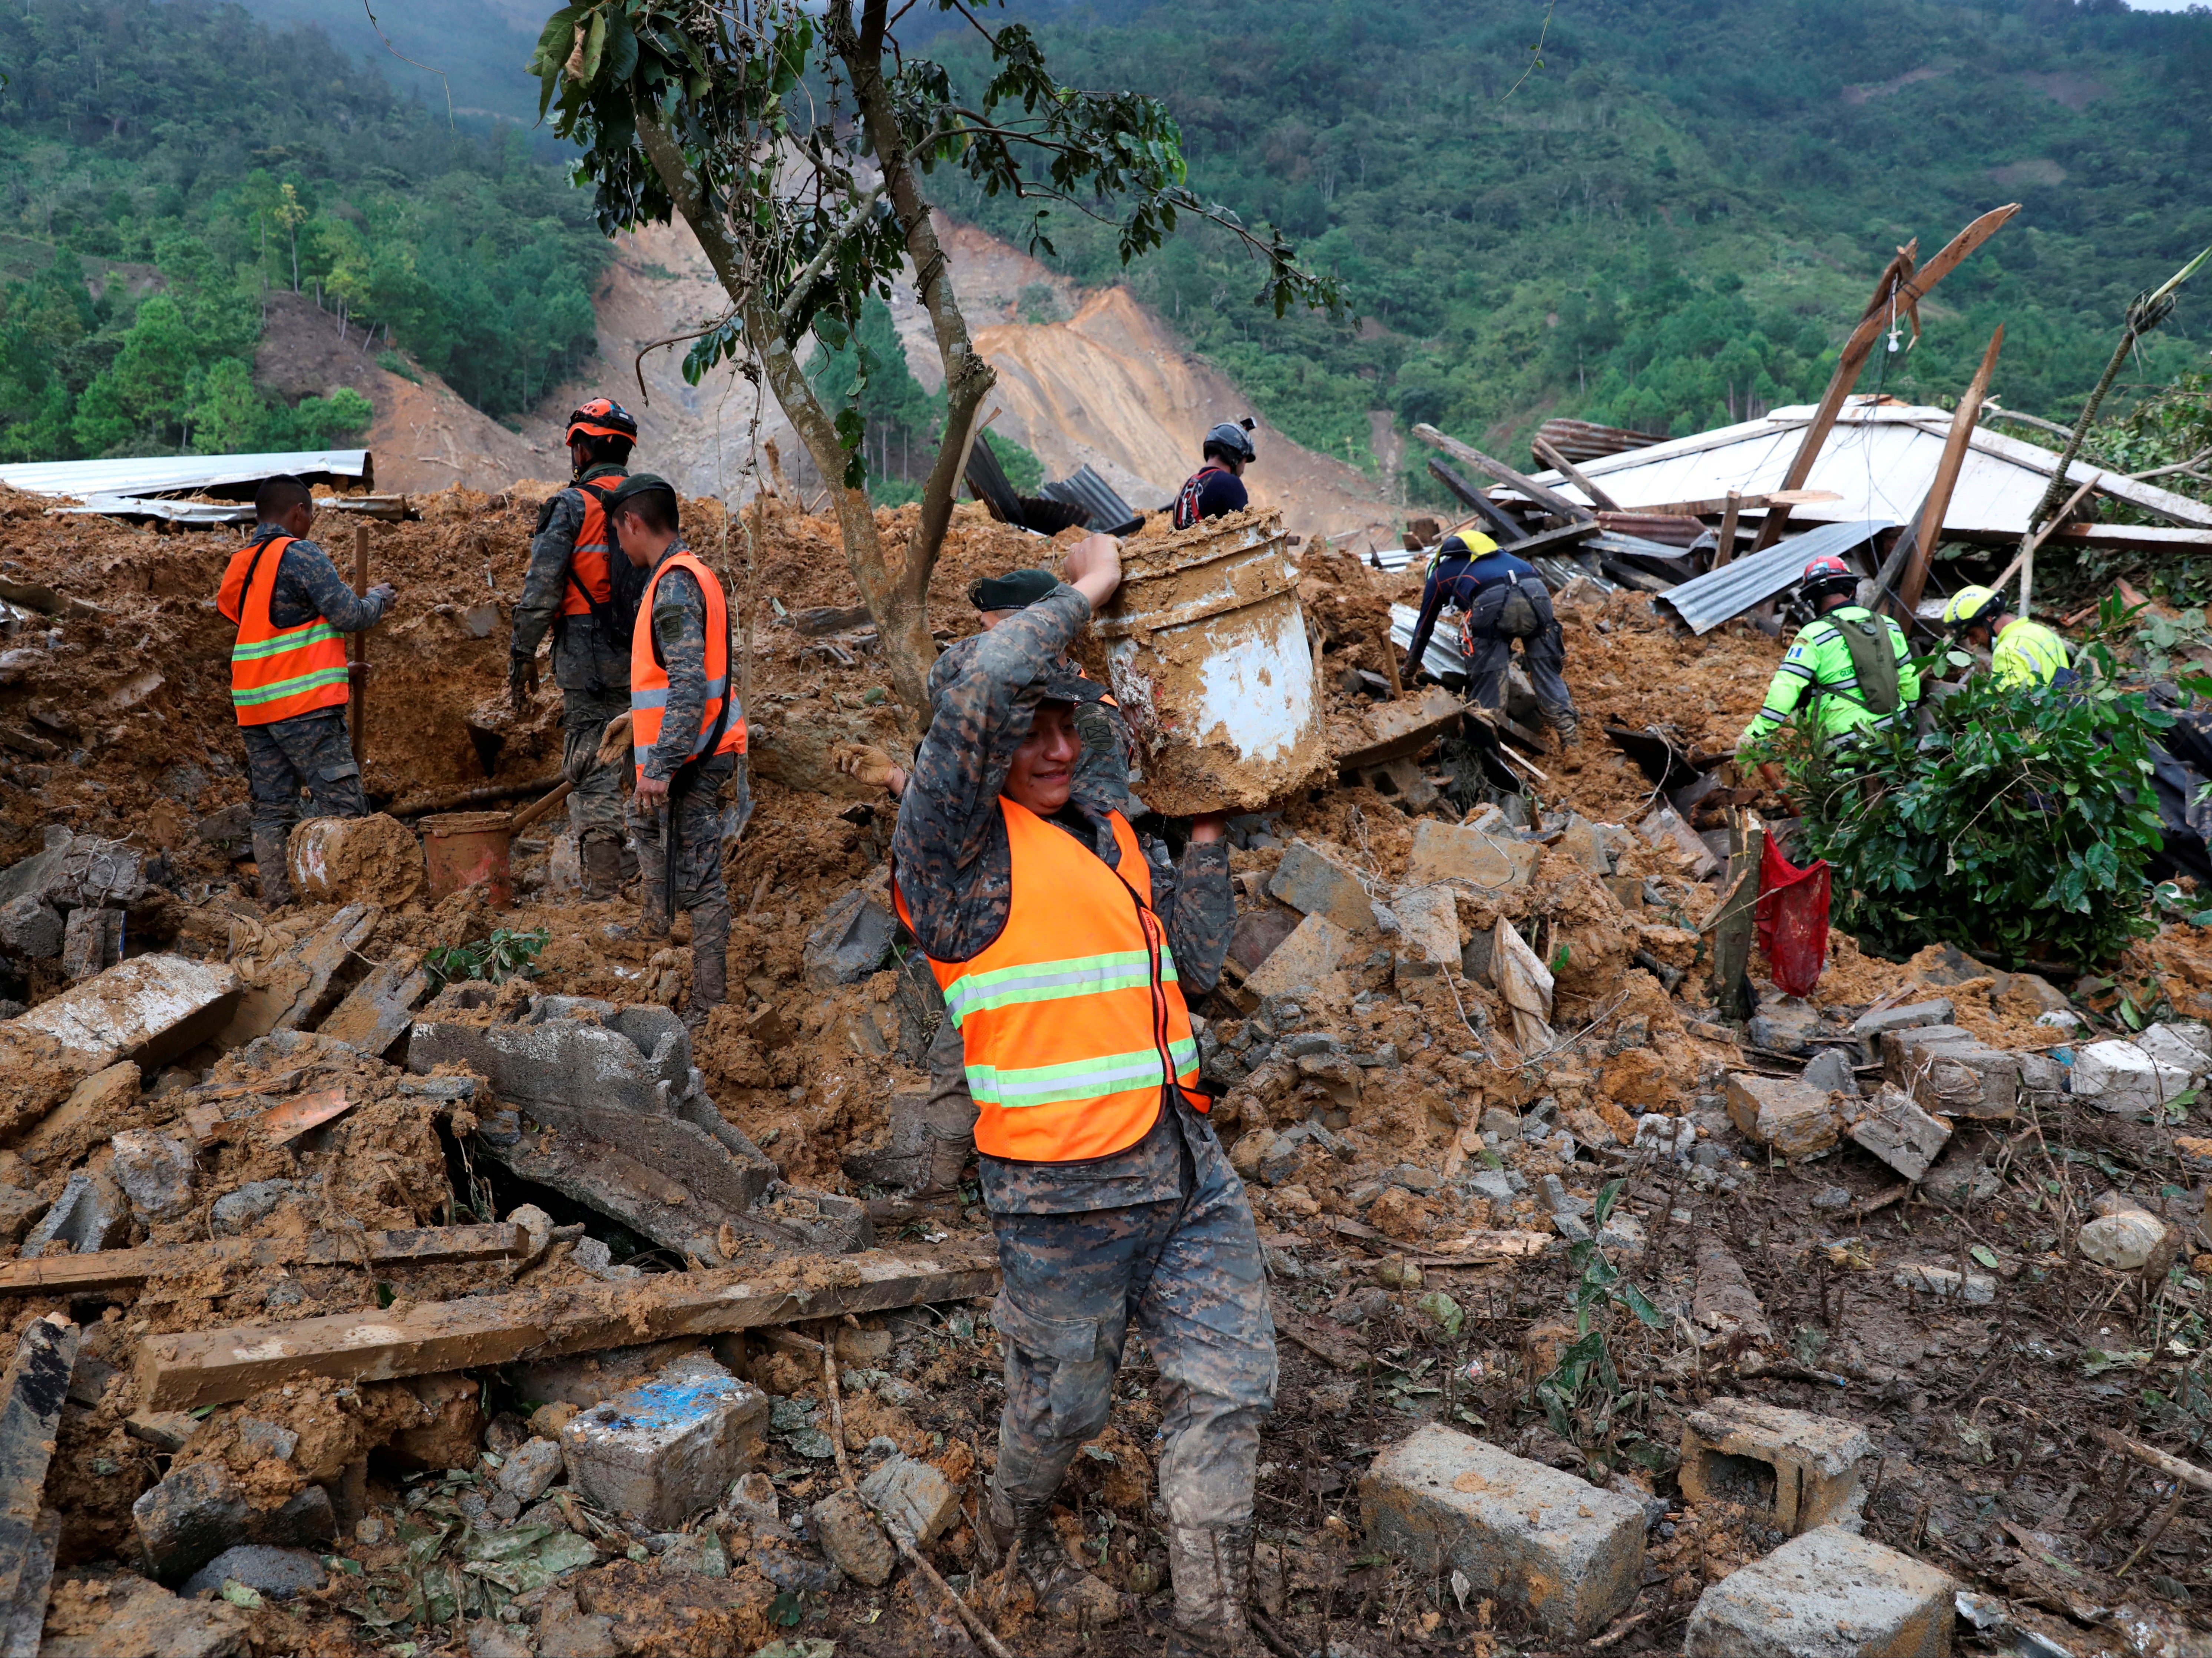 Soldiers remove debris and mud from an area hit by a mudslide, caused by heavy rains brought by Storm Eta